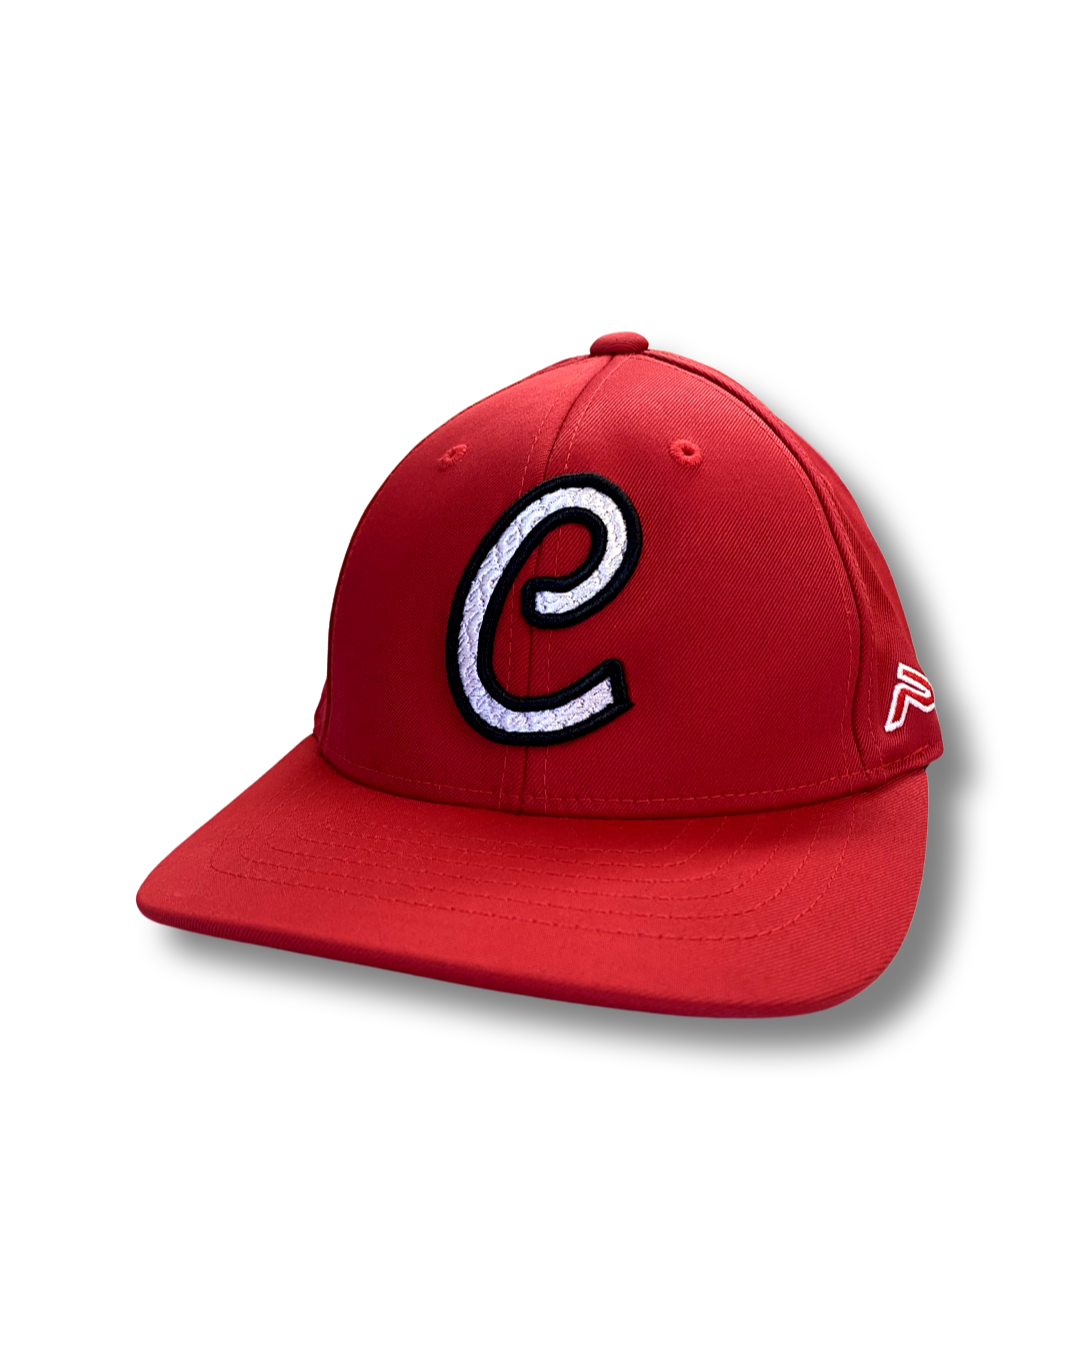 Red "C" Hat Fitted